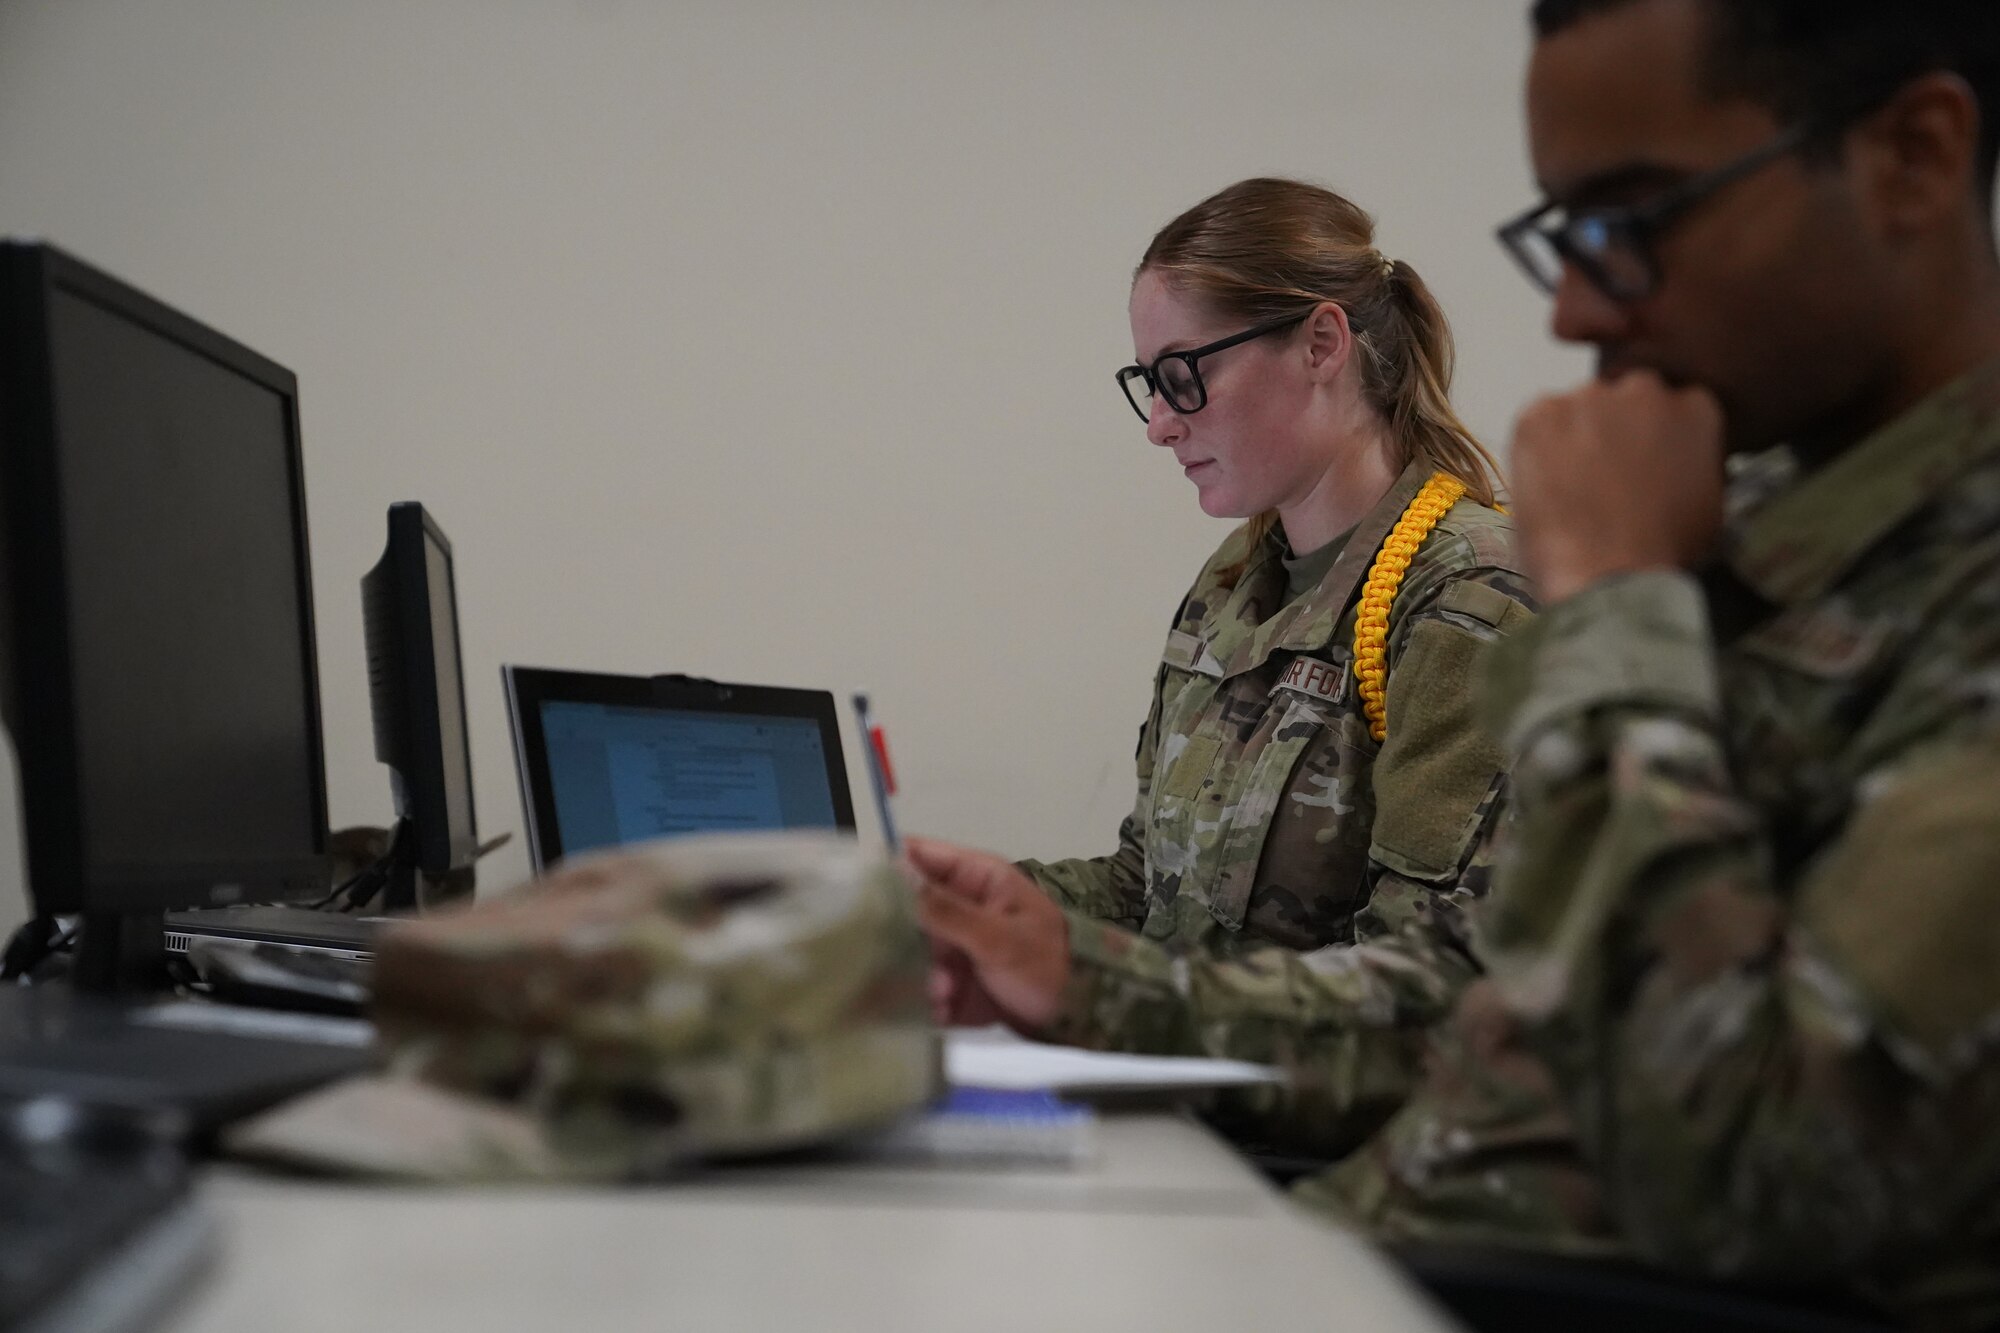 U.S. Air Force Airman Madelyn Brown, 336th Training Squadron cyber transport student, looks at her computer during class inside Thompson Hall at Keesler Air Force Base, Mississippi, July 26, 2021. As a yellow rope, Brown has taken a charge early to become a leader amongst her peers. (U.S. Air Force photo by Senior Airman Spencer Tobler)